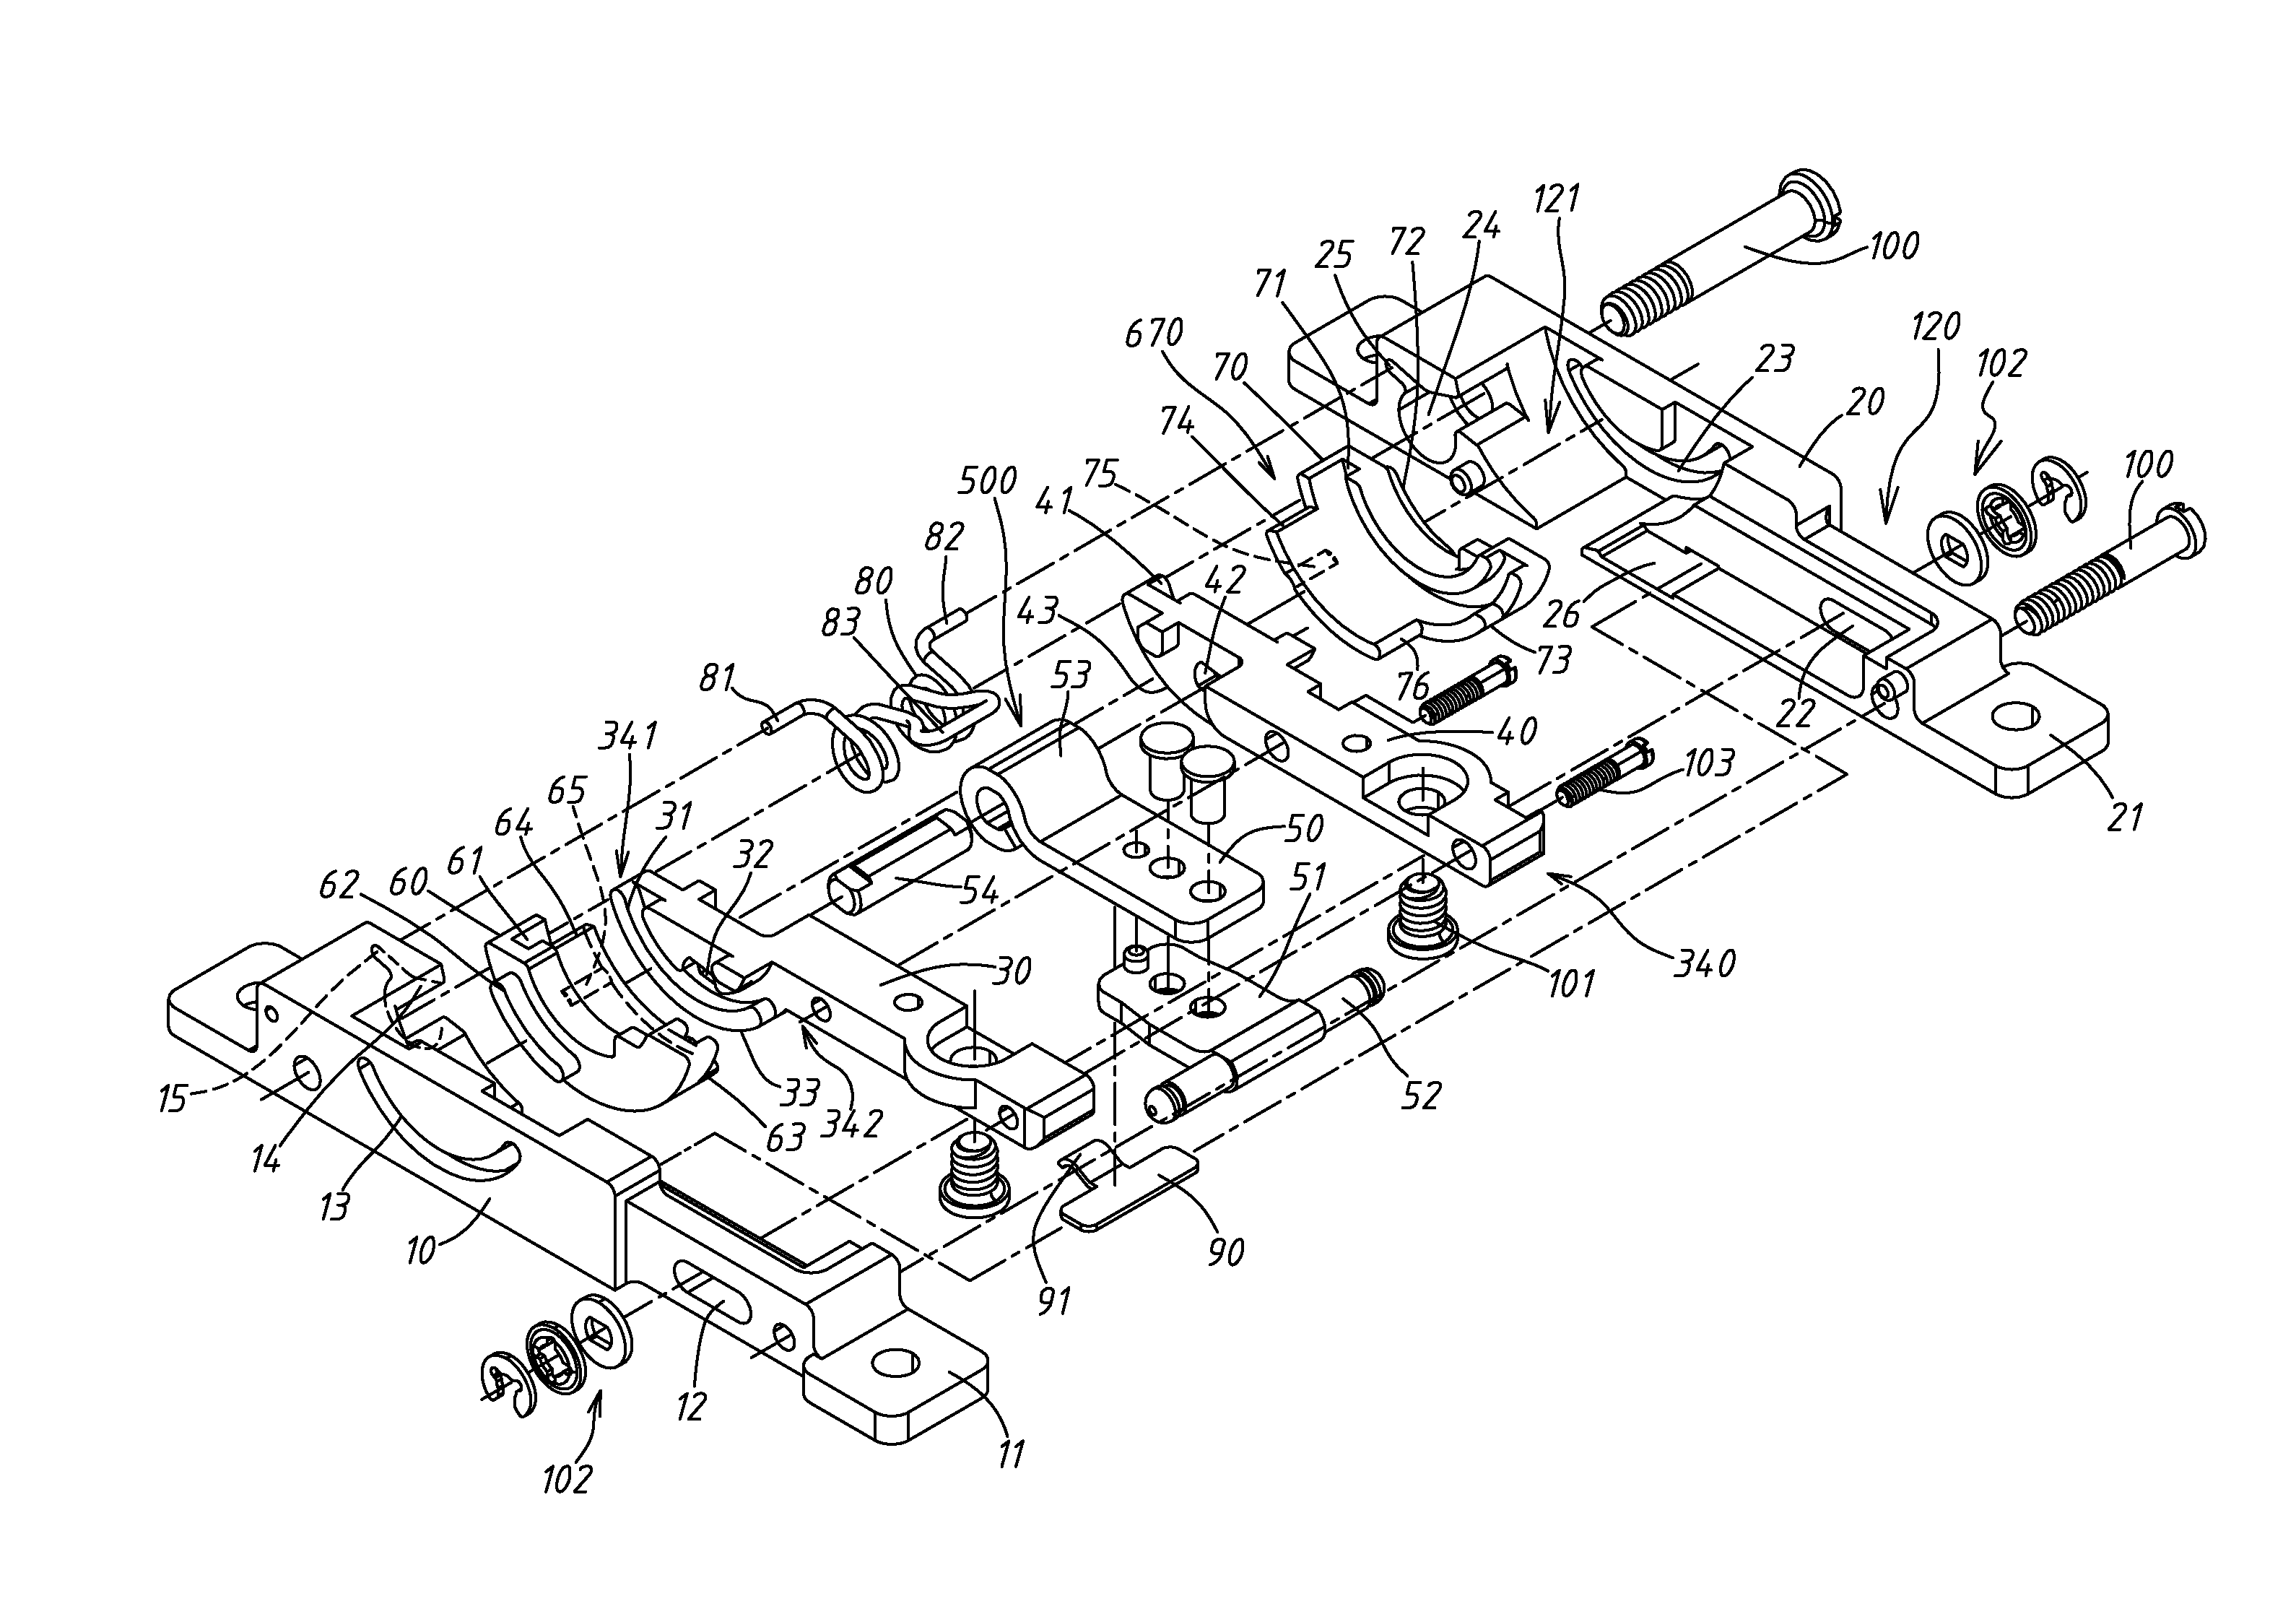 Hinge device capable of extending rotational angle